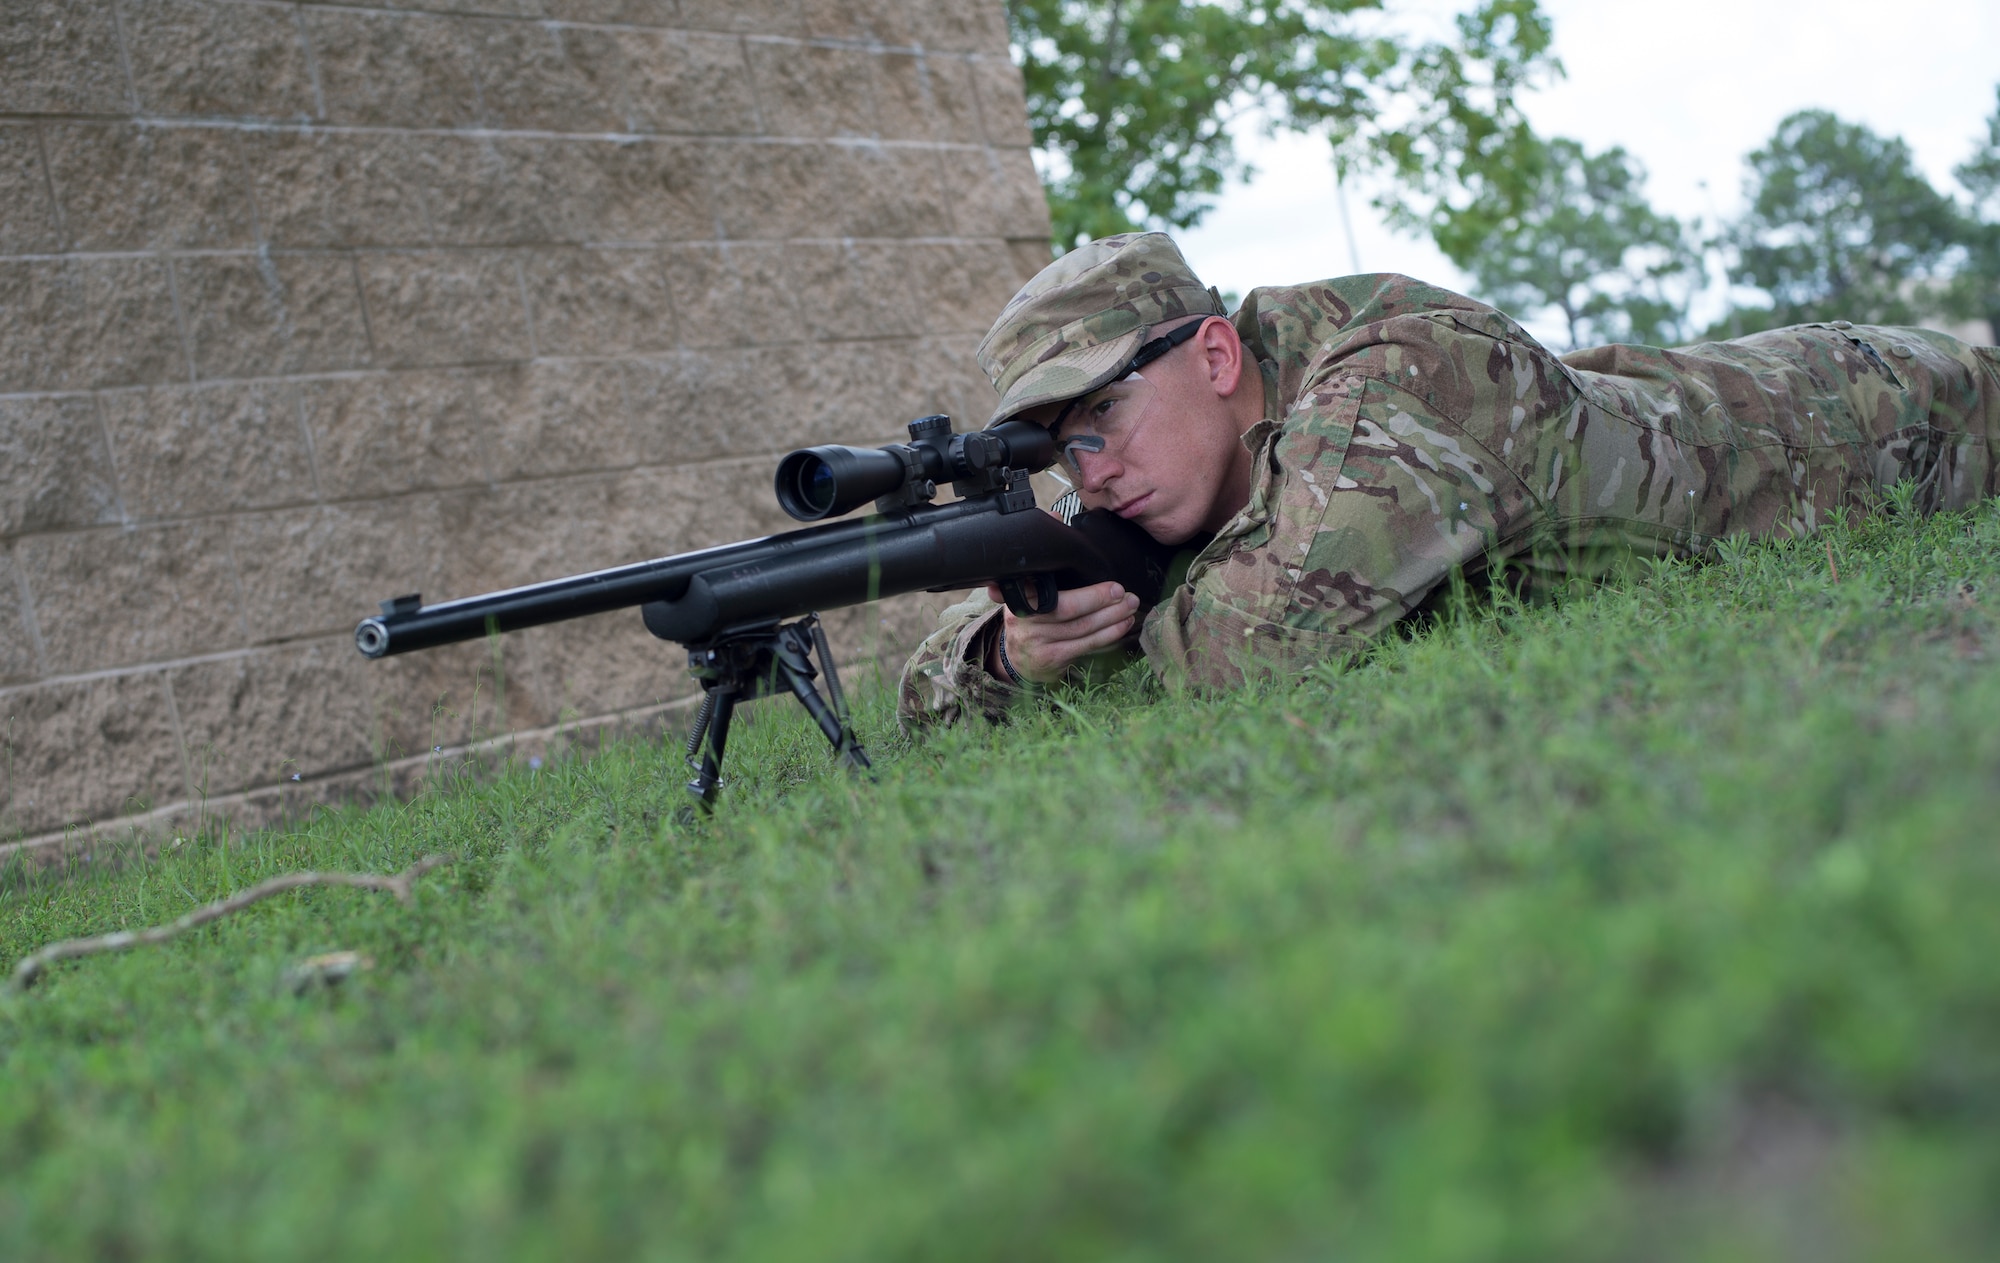 U.S. Air Force Staff Sgt. Joseph Crotty, 822d Base Defense Squadron NCO in charge of standards and evaluations, demonstrates the prone position July 2, 2015, at Moody Air Force Base, Ga. Crotty attended England’s basic sniper course where he learned intelligence gathering and observational skills to be force multiplier on the battlefield. (U.S. Air Force photo by Staff Sgt. Eric Summers Jr./Released)